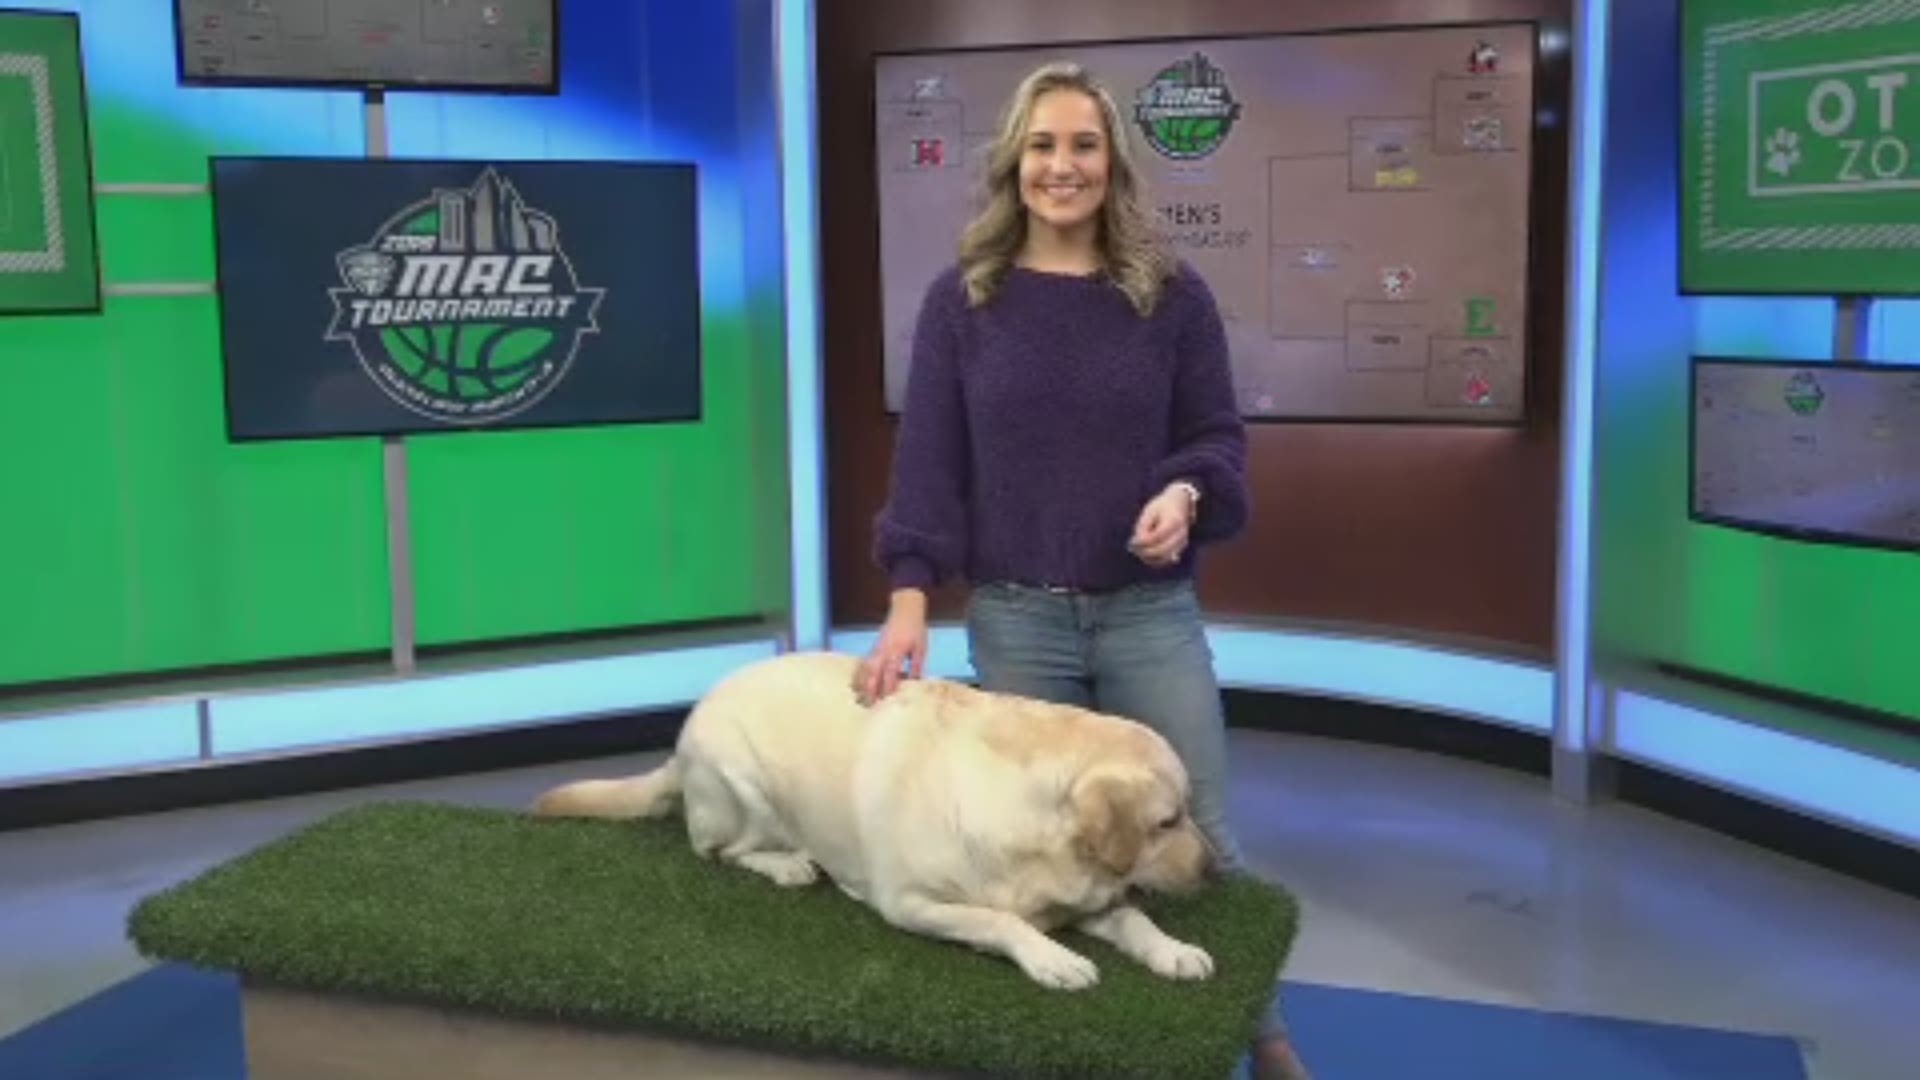 2 on Your Side's Heather Prusak fills our her bracket for the men's MAC tournament joined by a special guest.